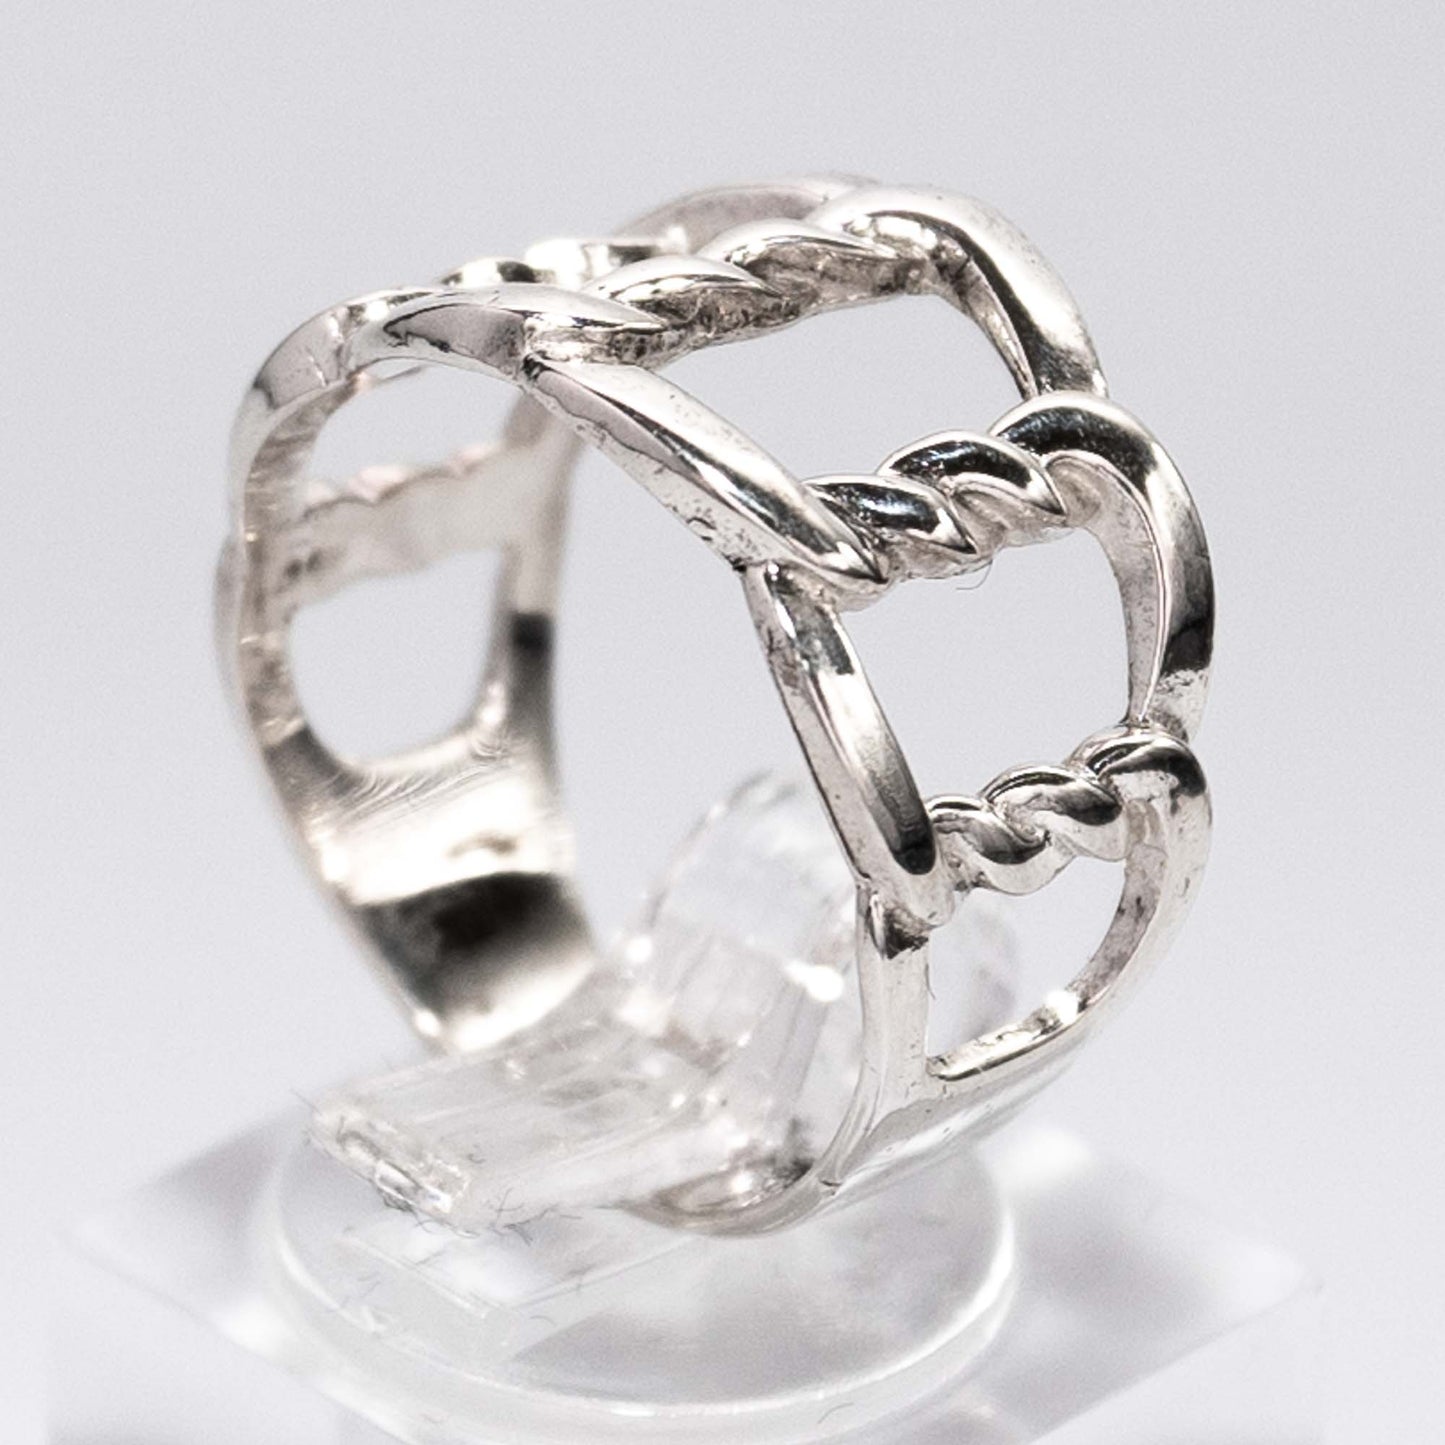 Chain- 925 Silver ring